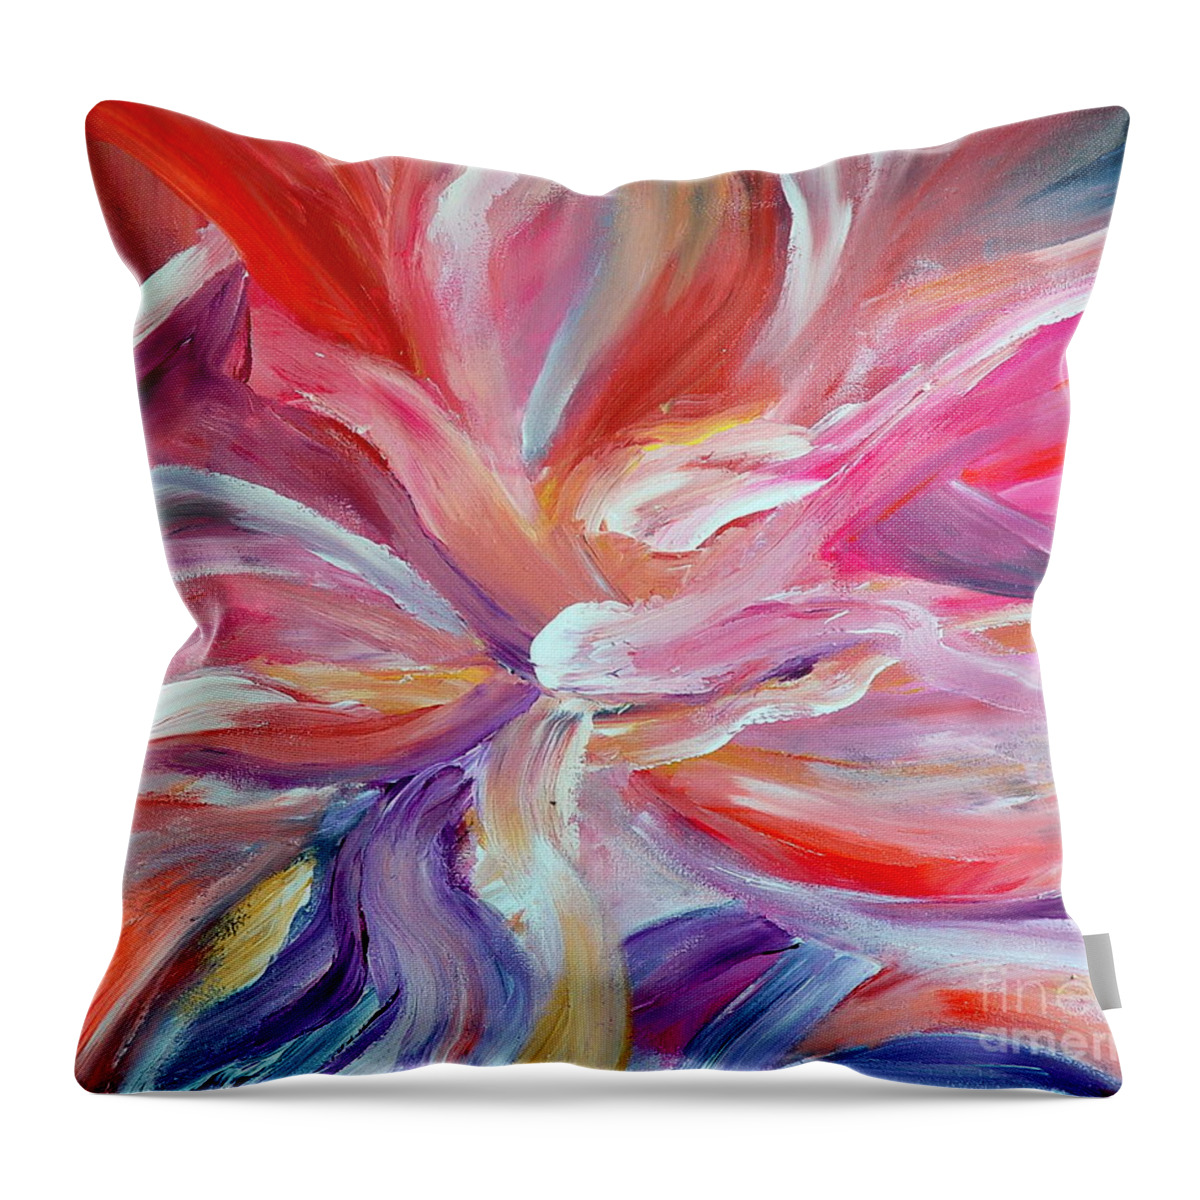 Abstract Throw Pillow featuring the painting Dream by Teresa Wegrzyn